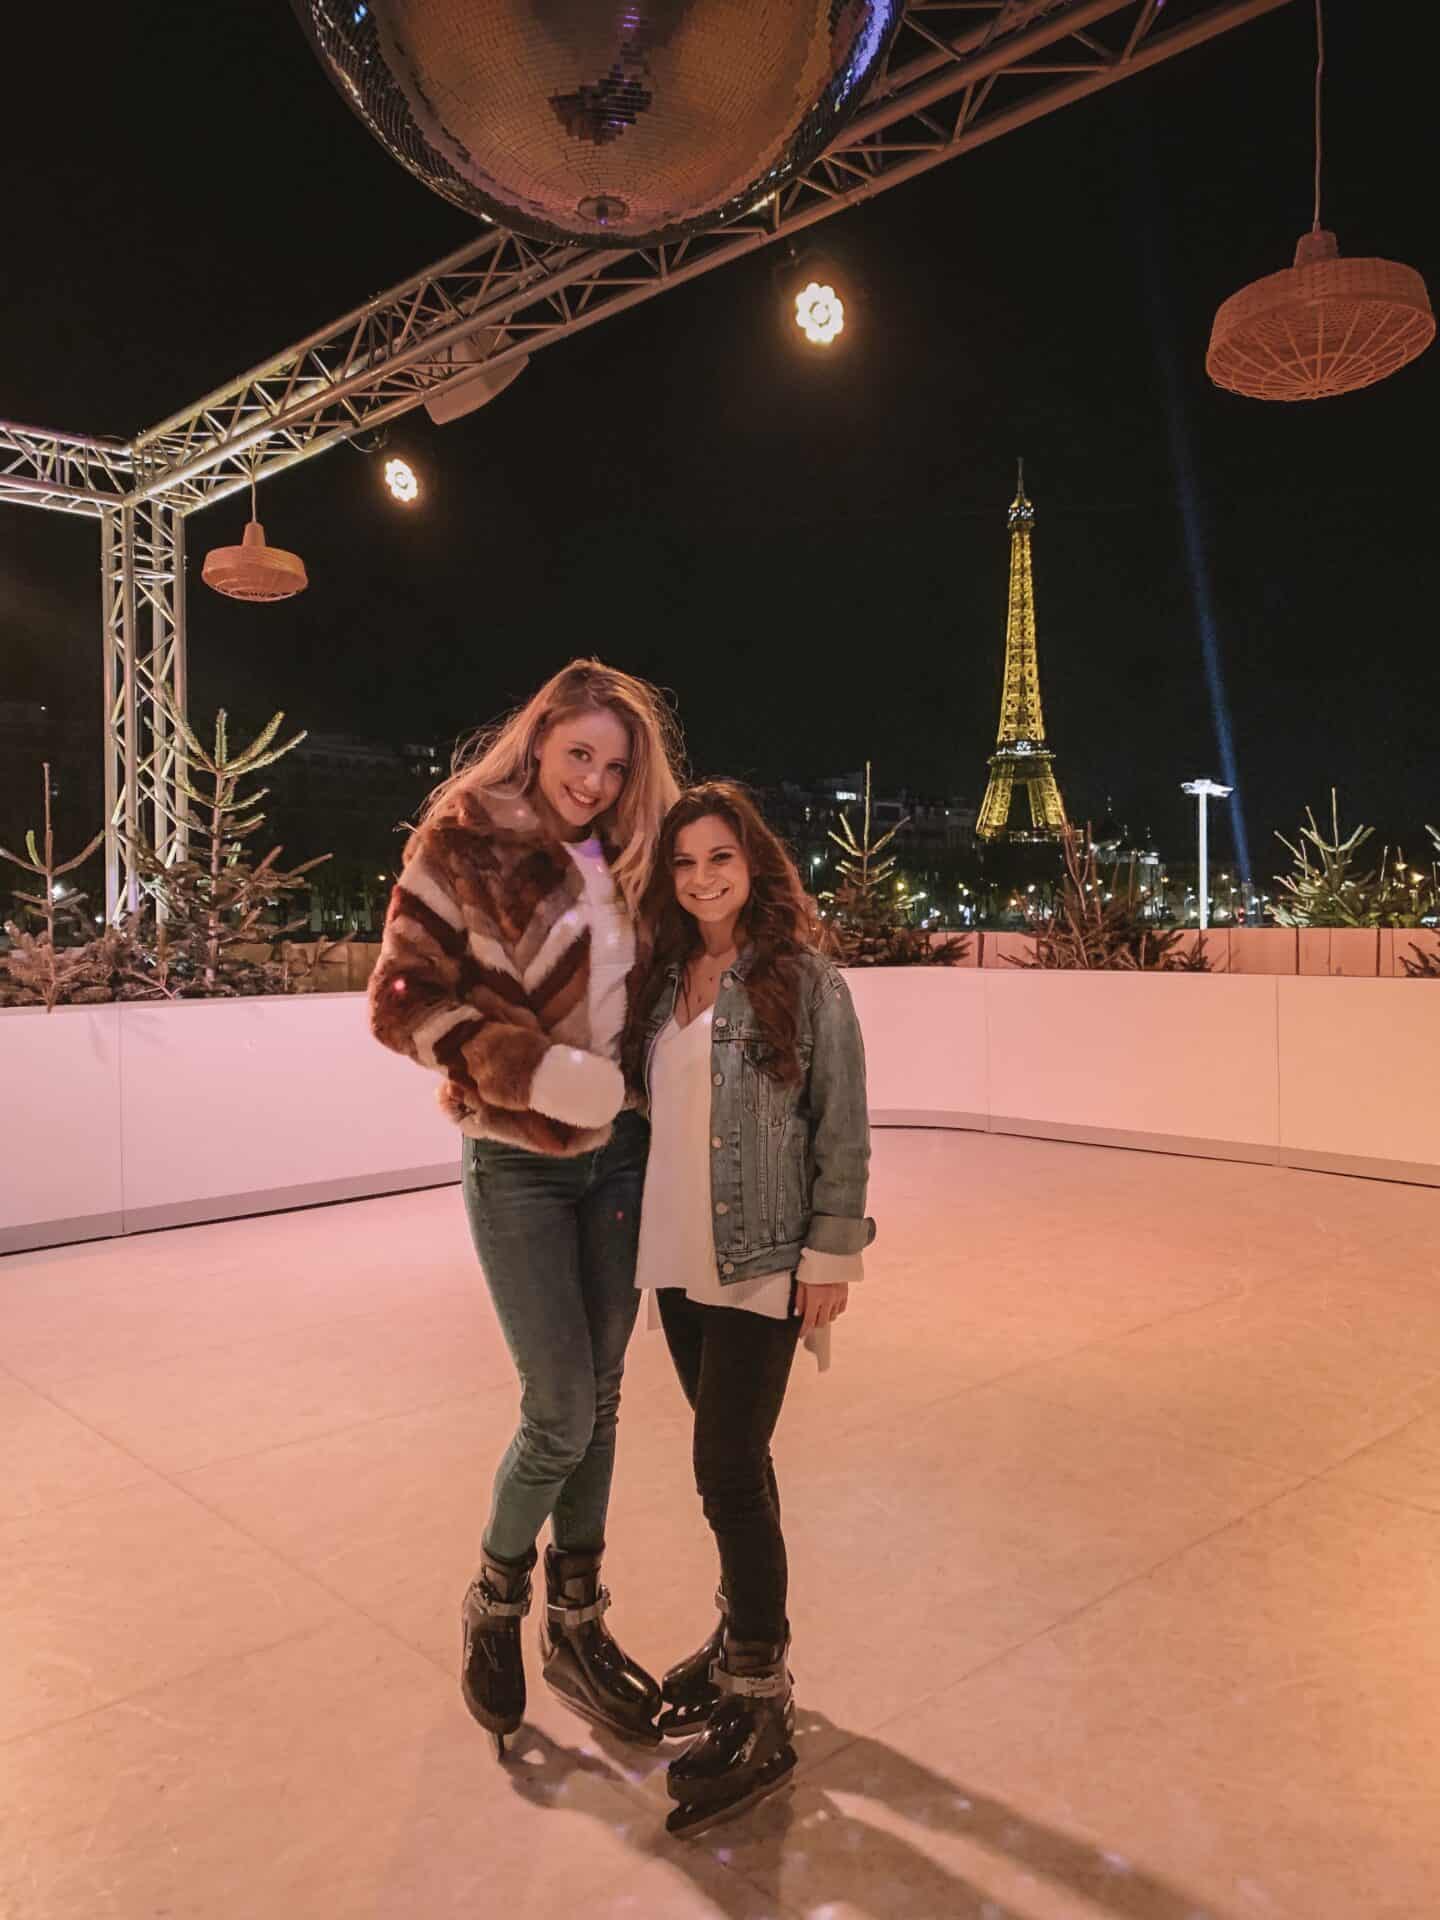 Ice skating in Paris during the winter